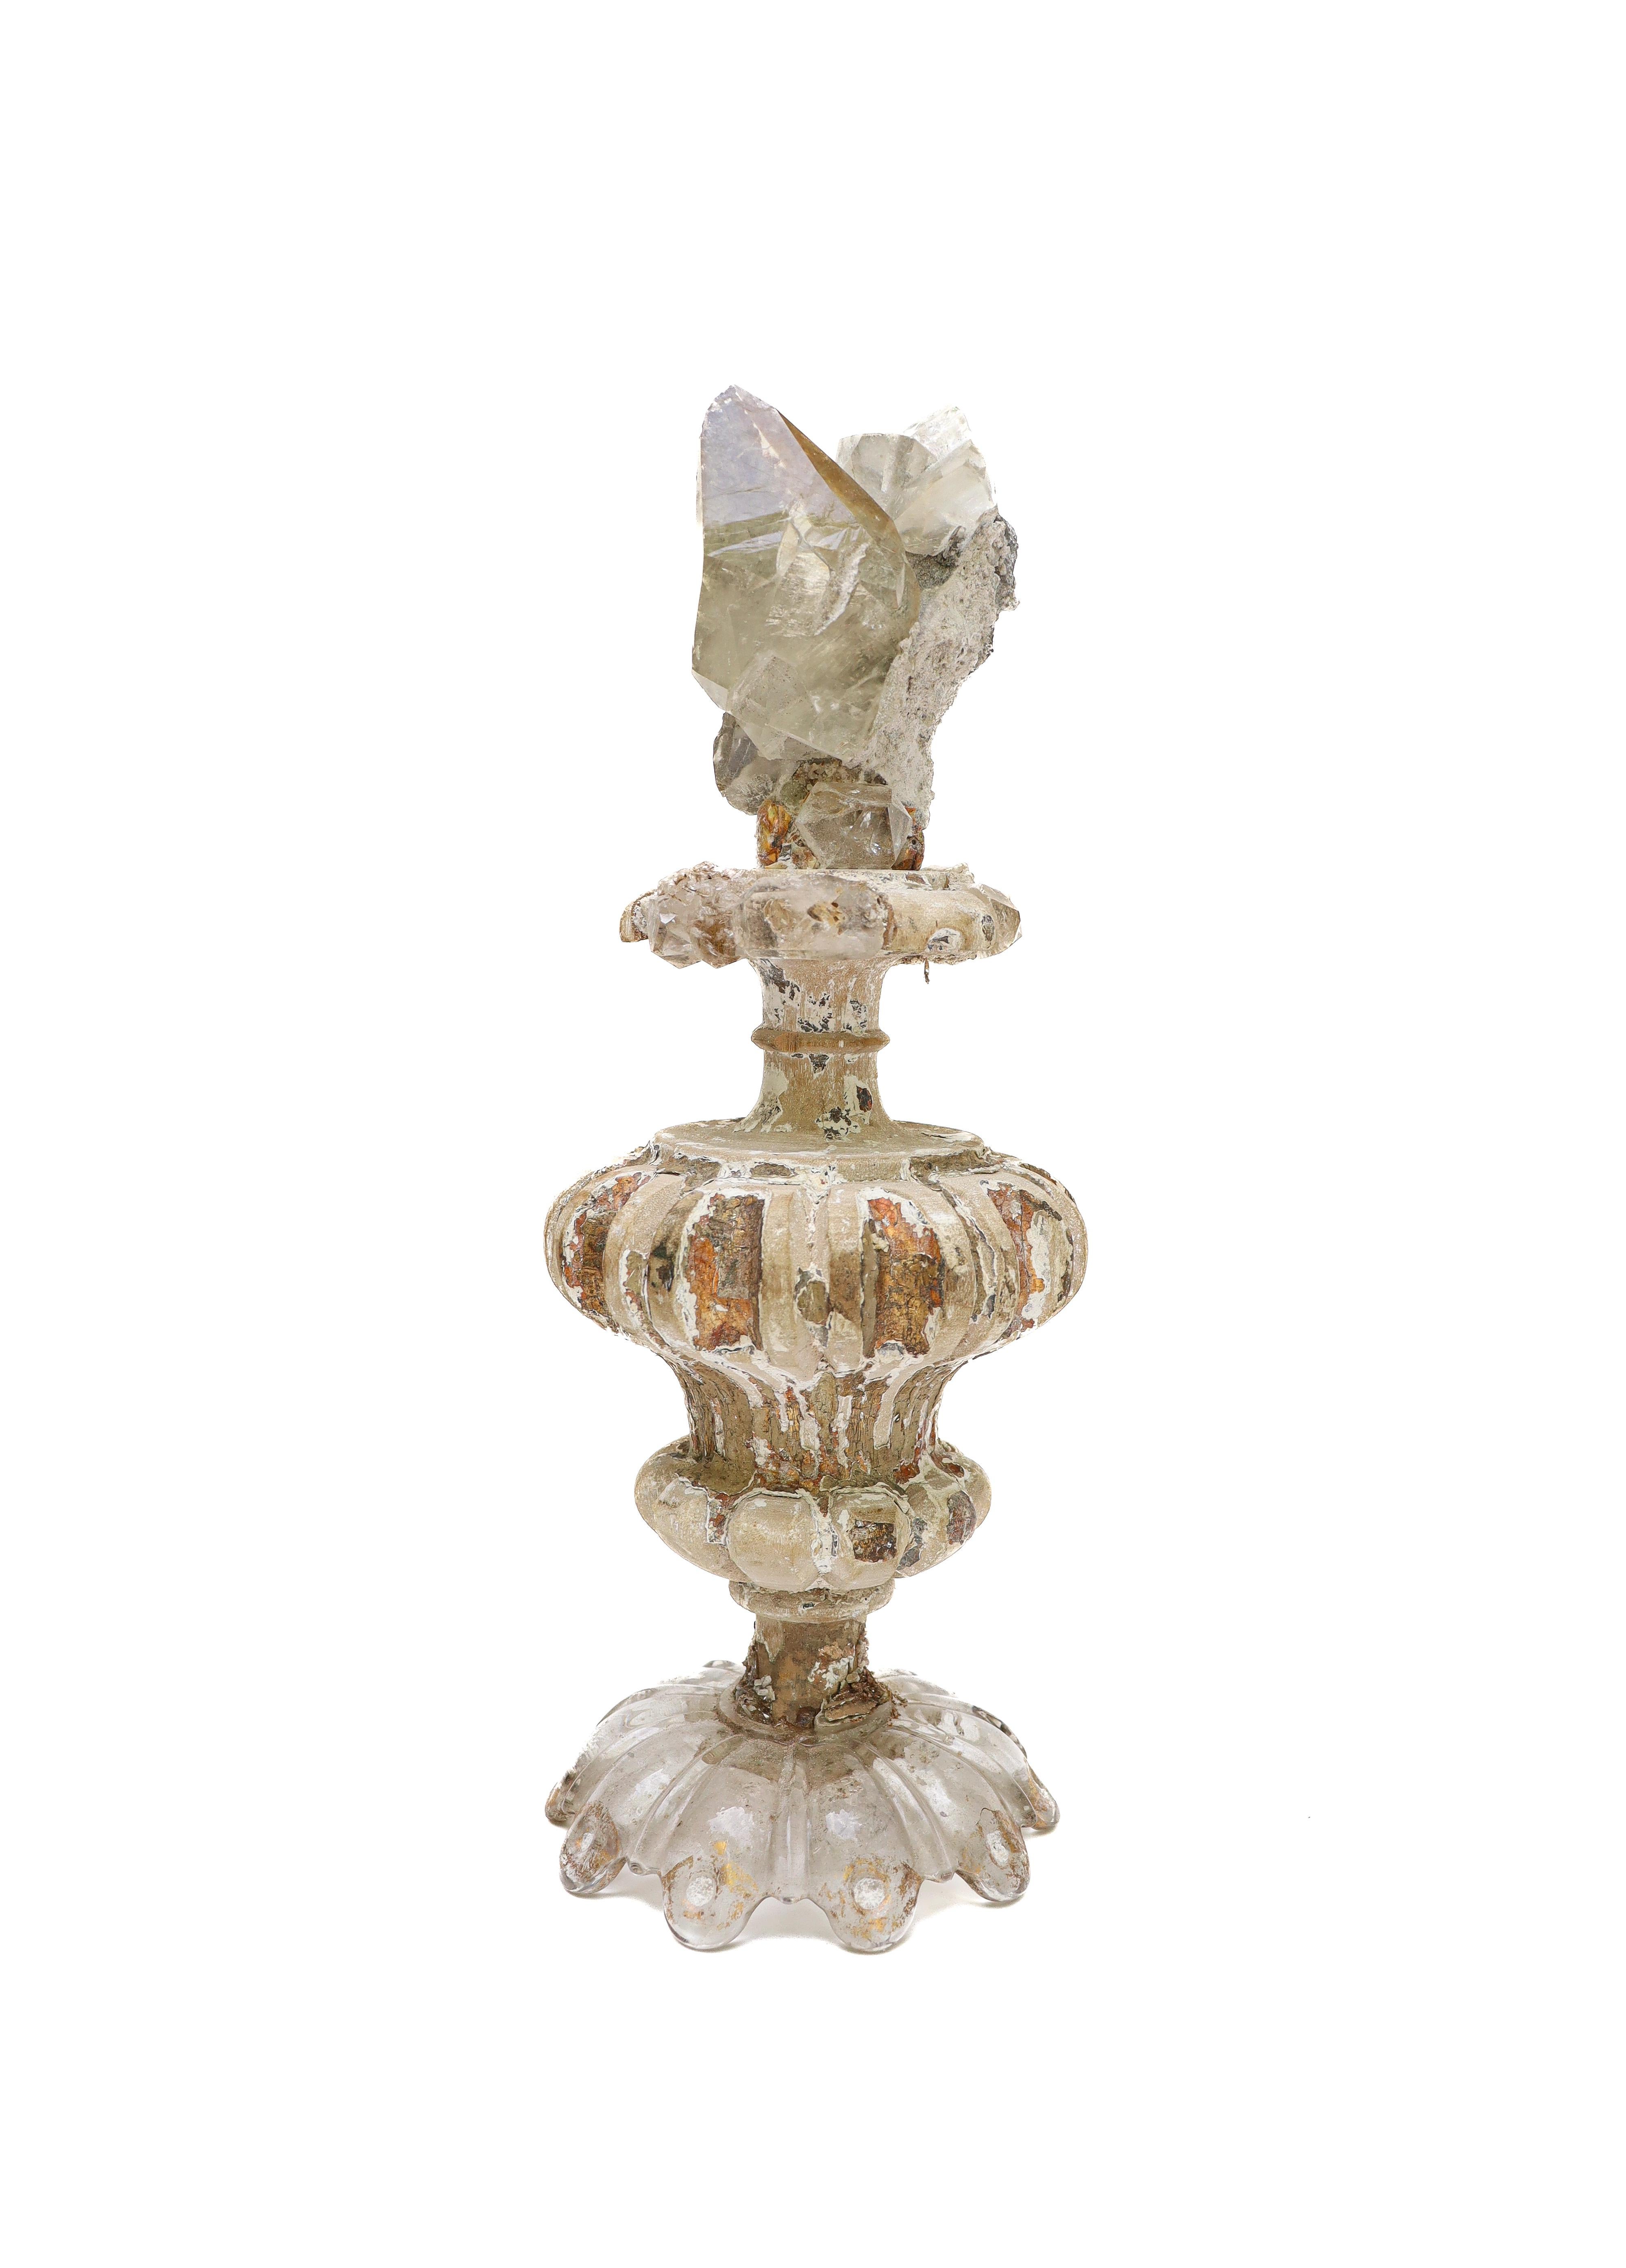 Rococo 17th Century Italian Fragments 'Group of Three' with Calcite Crystals on Bobeche